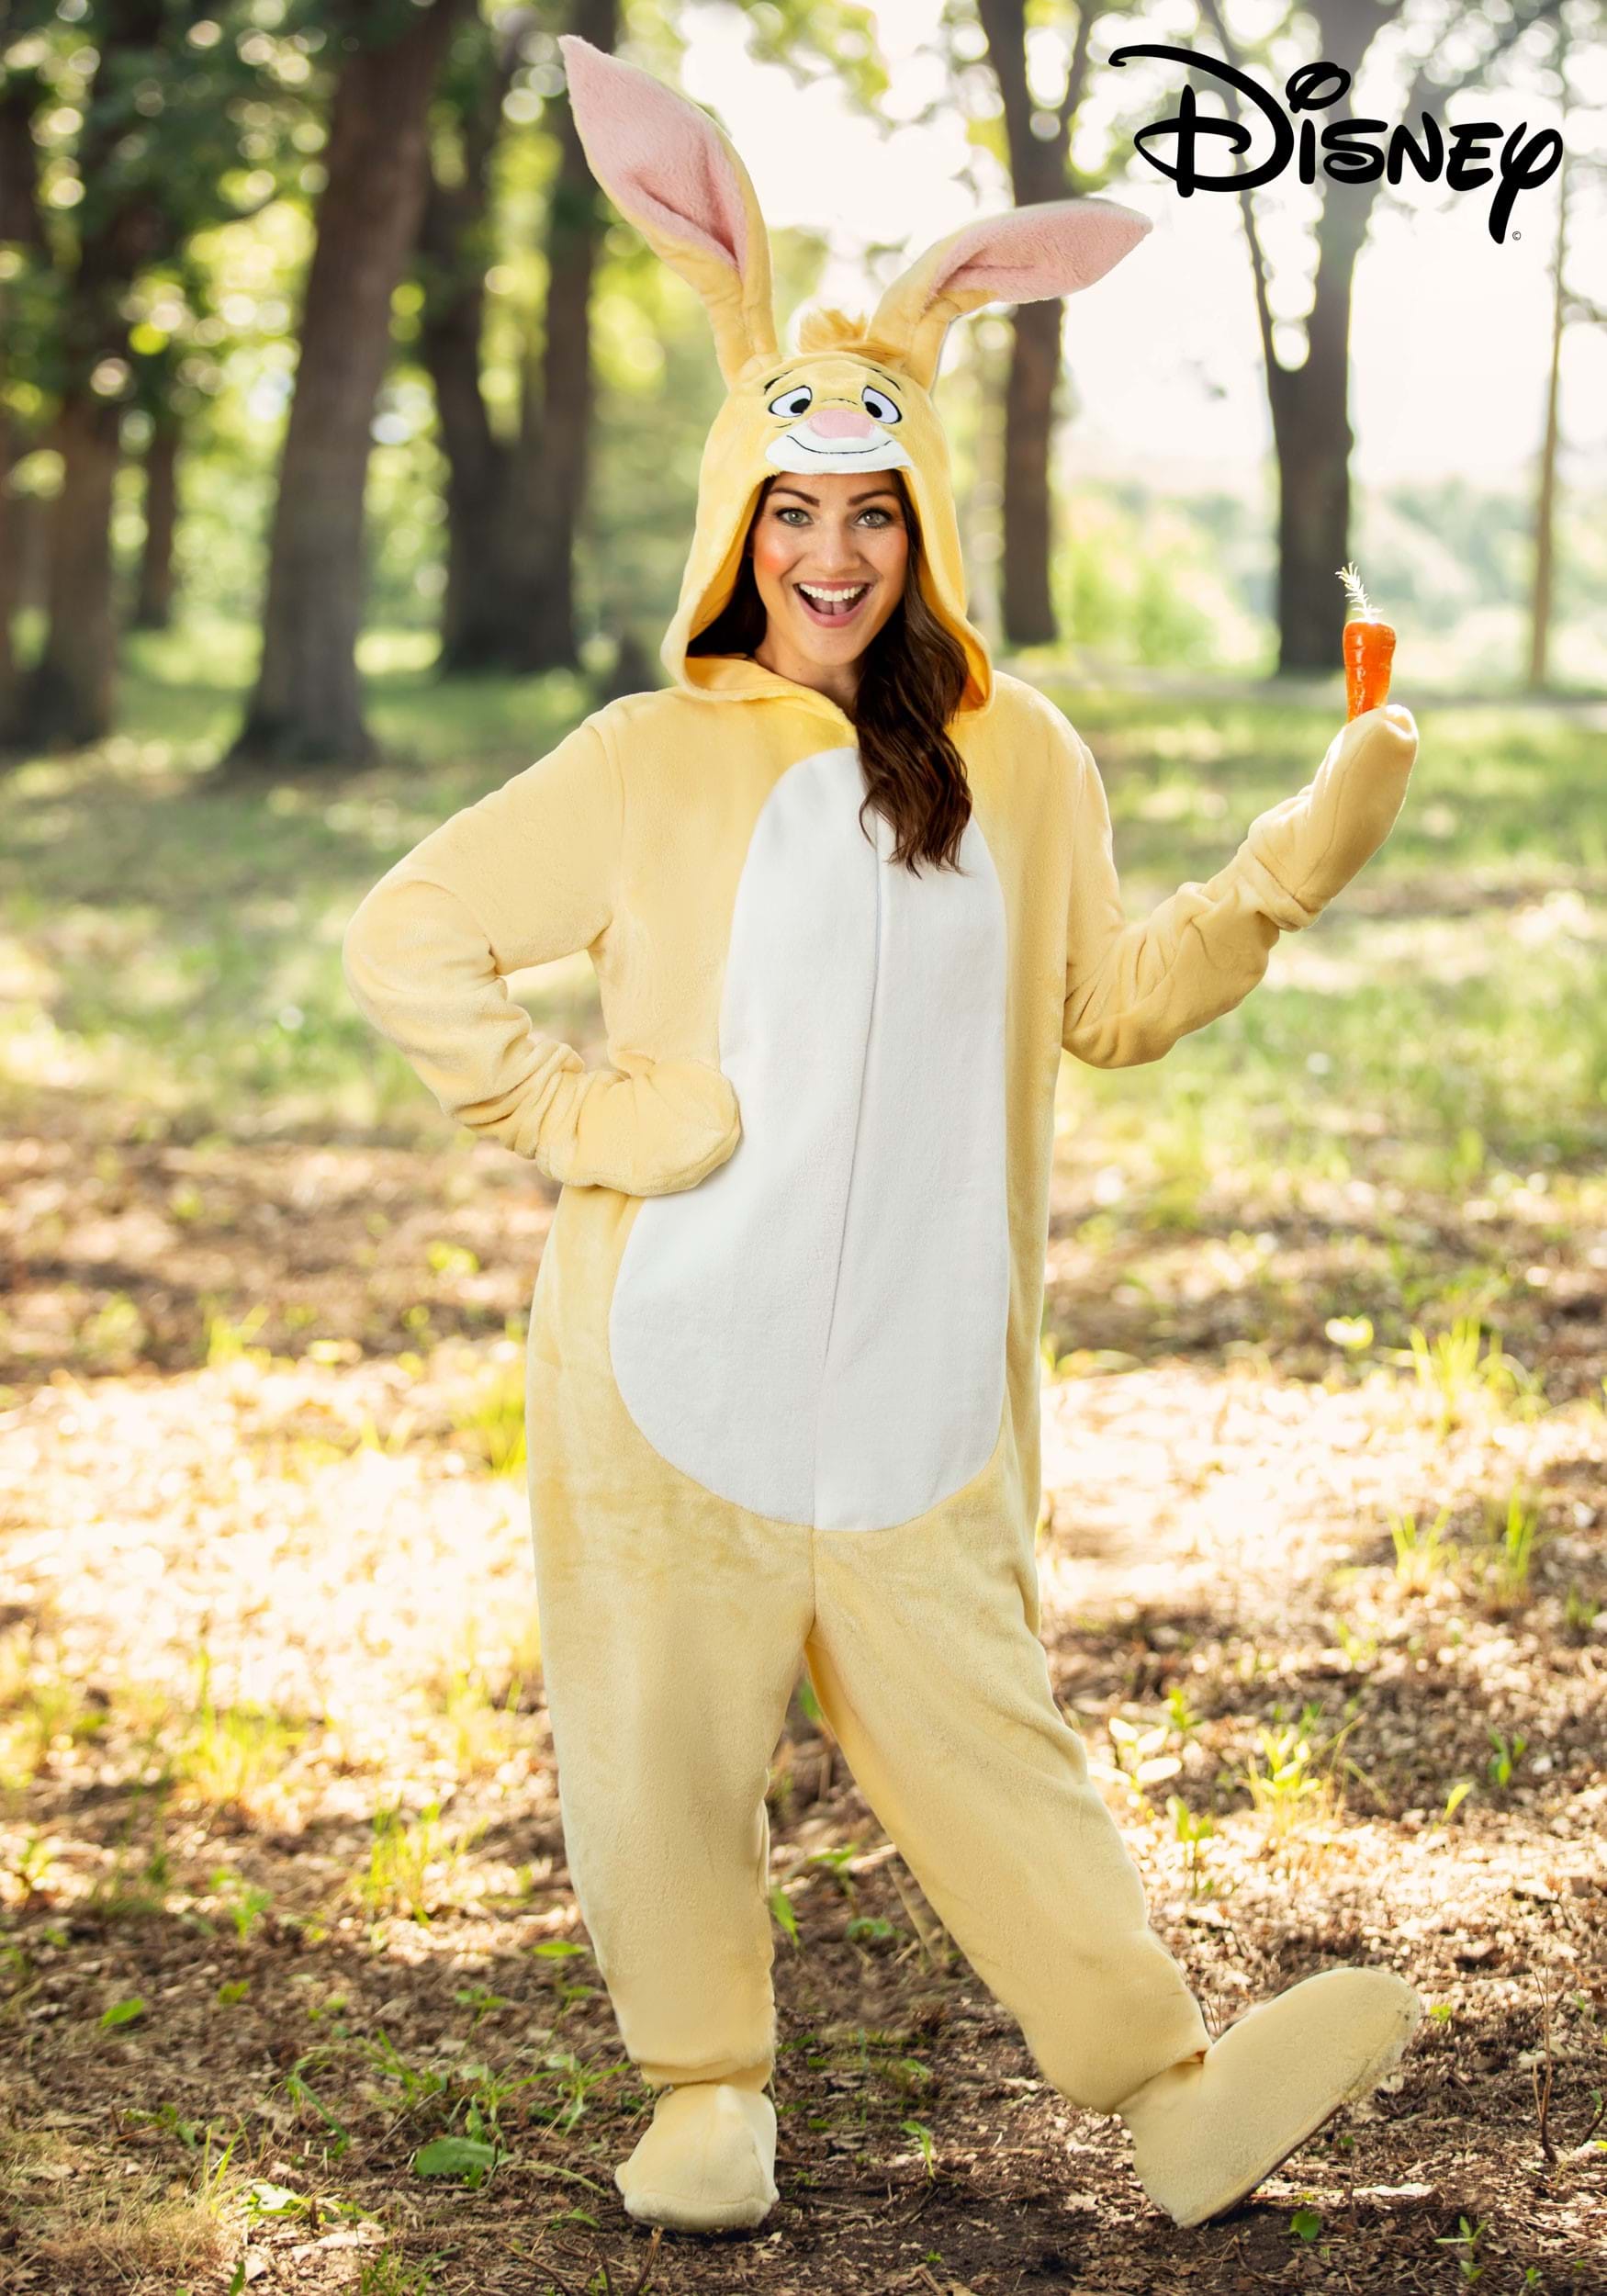  Disguise unisex adults Pikachu Deluxe Adult Sized Costumes,  Yellow, Small Medium US : Clothing, Shoes & Jewelry